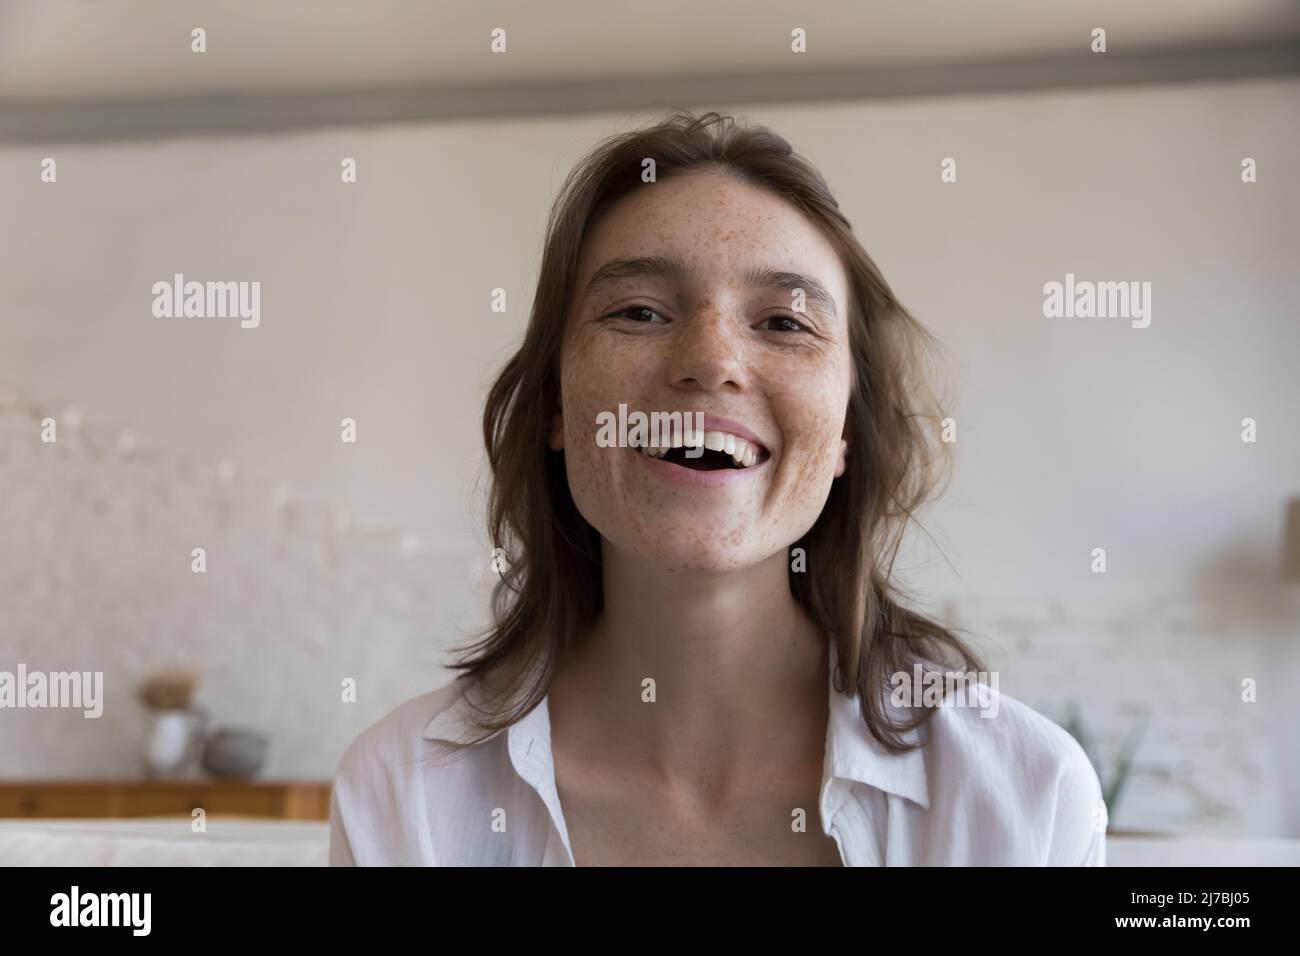 Excited cheerful freckled blogger girl head shot screen view portrait Stock Photo